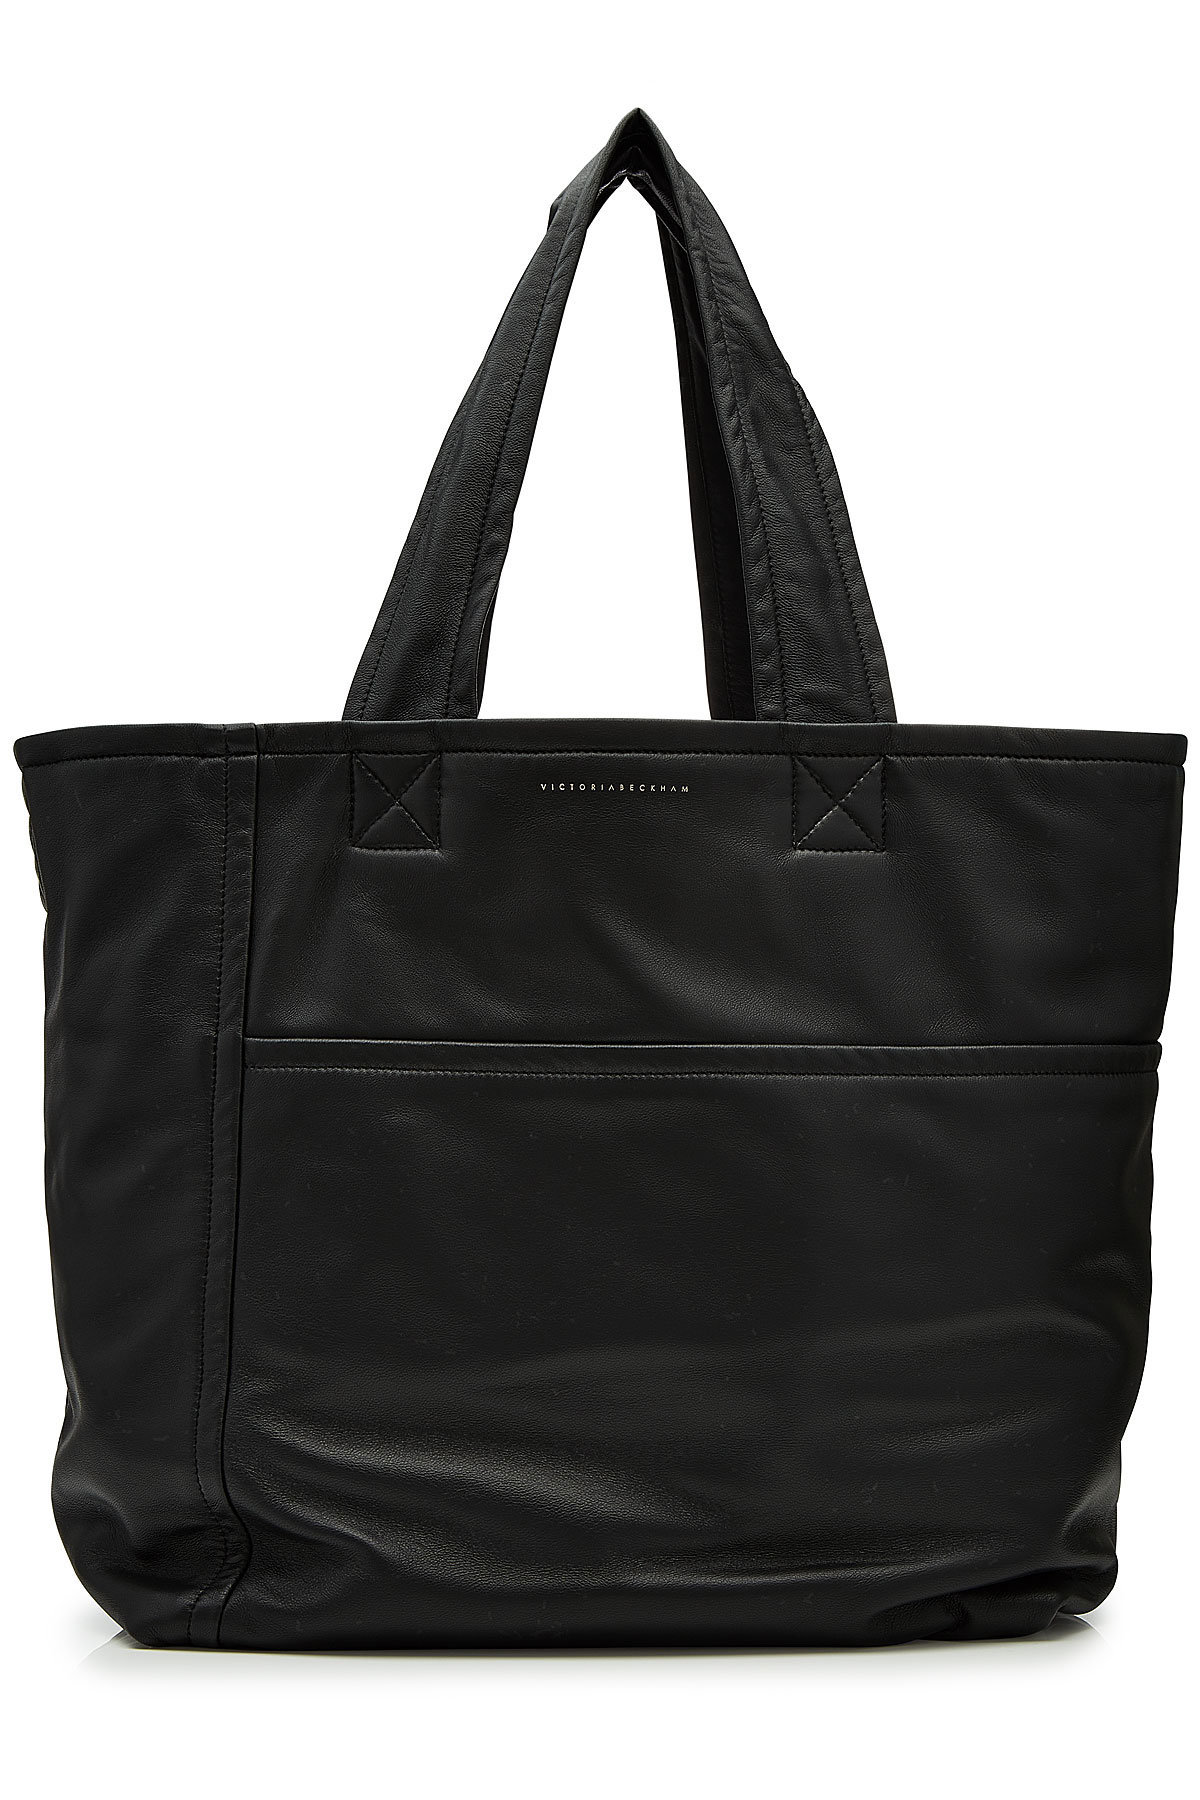 Sunday Leather Tote by Victoria Beckham